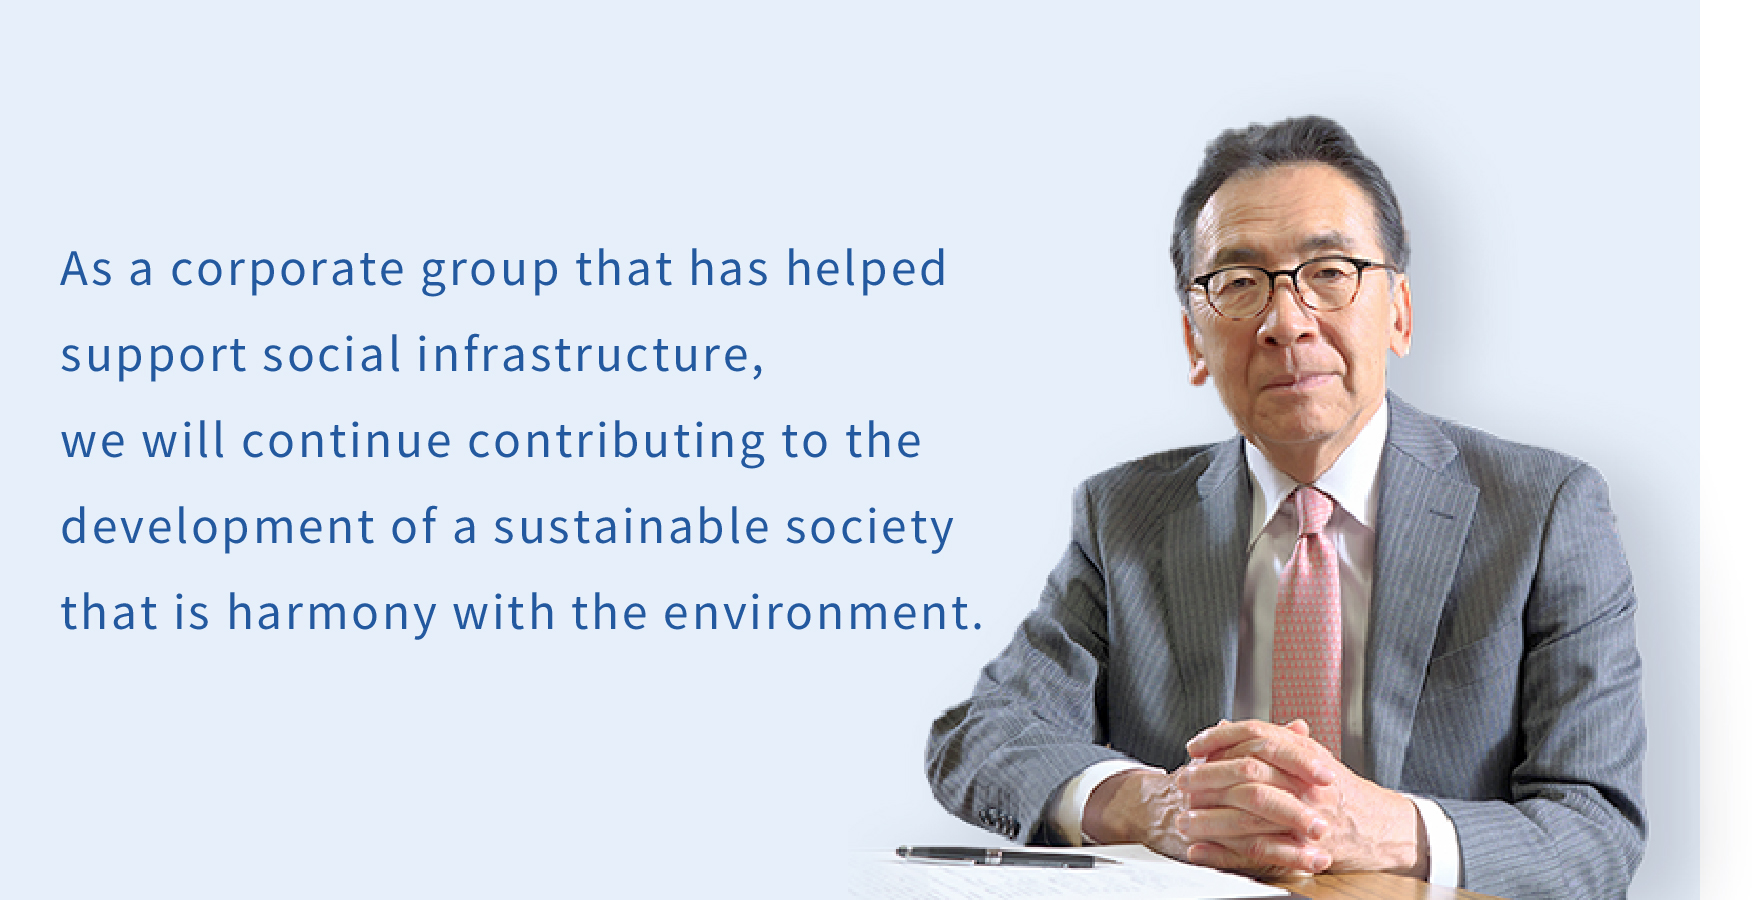 As a corporate group that has helped support social infrastructure, we will continue contributing to the development of a sustainable society that is harmony with the environment.